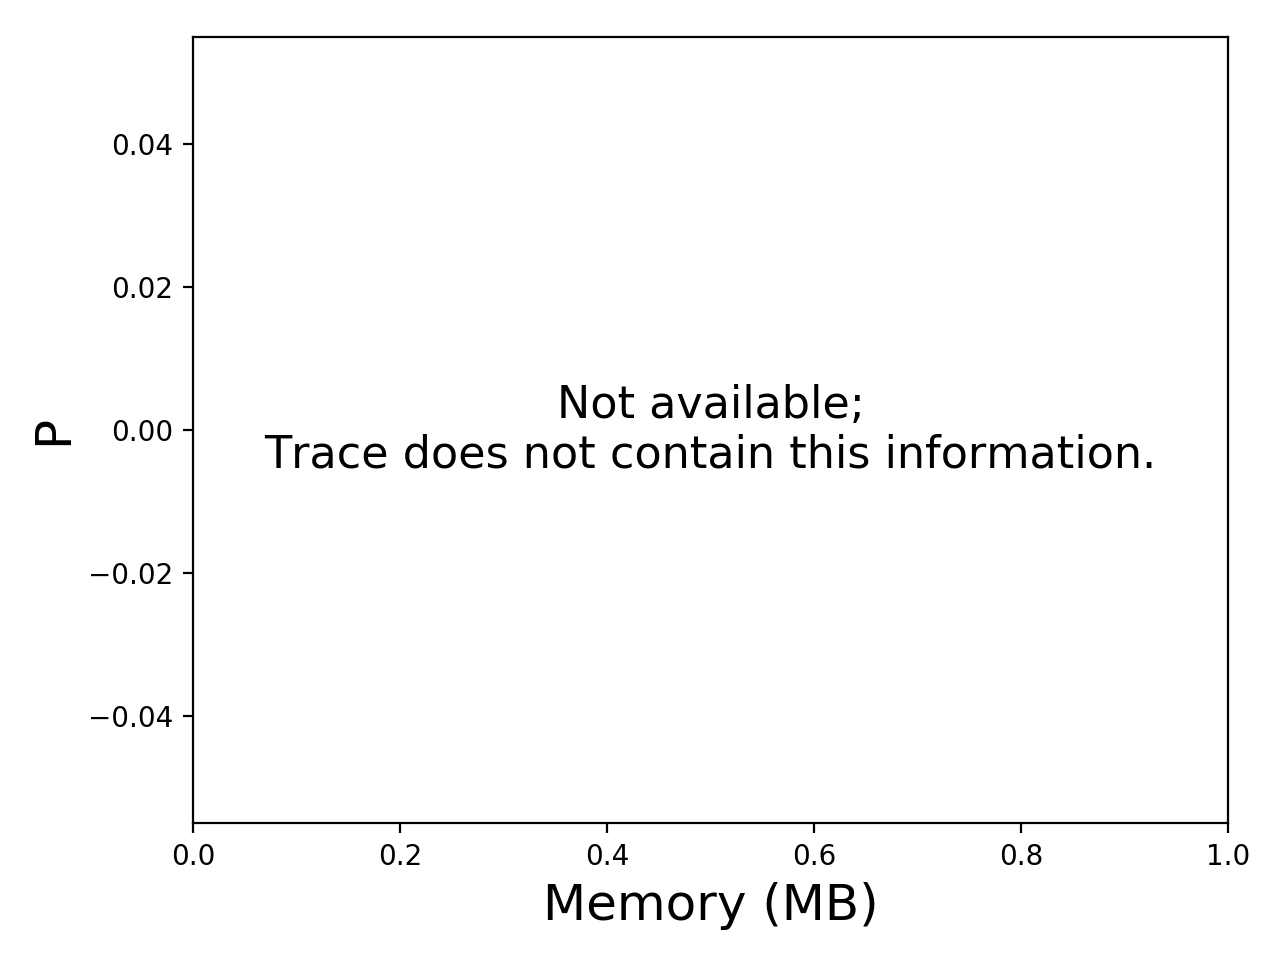 Task memory consumption graph for the Pegasus_P6a trace.